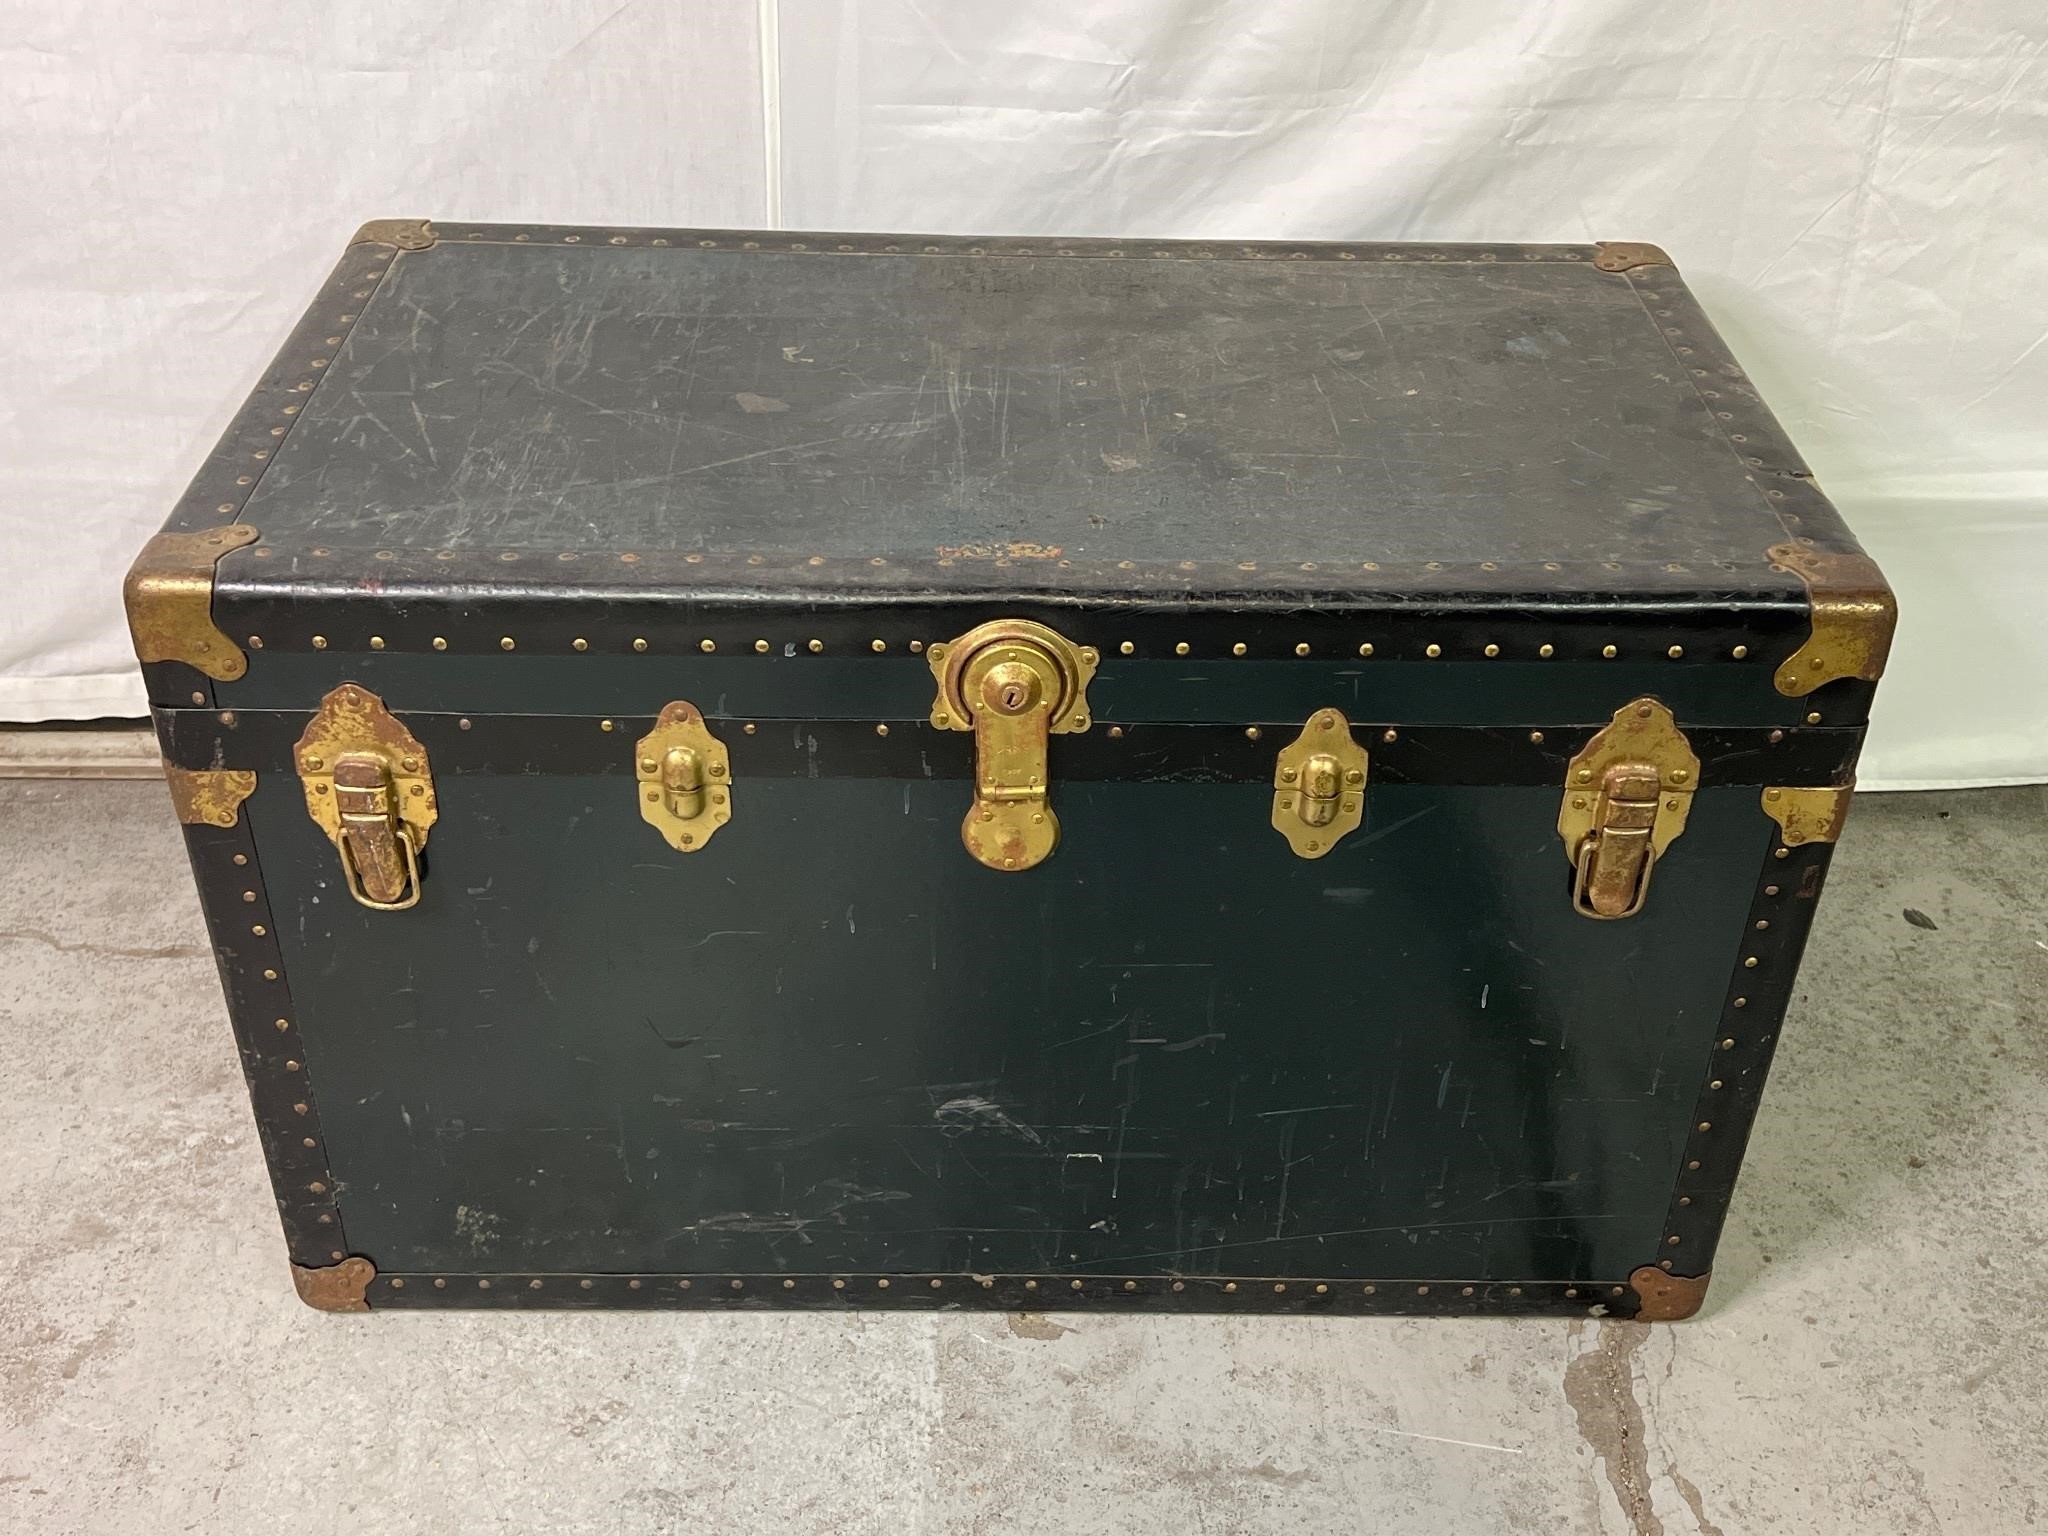 Antique Storage Trunk With Leather Handles